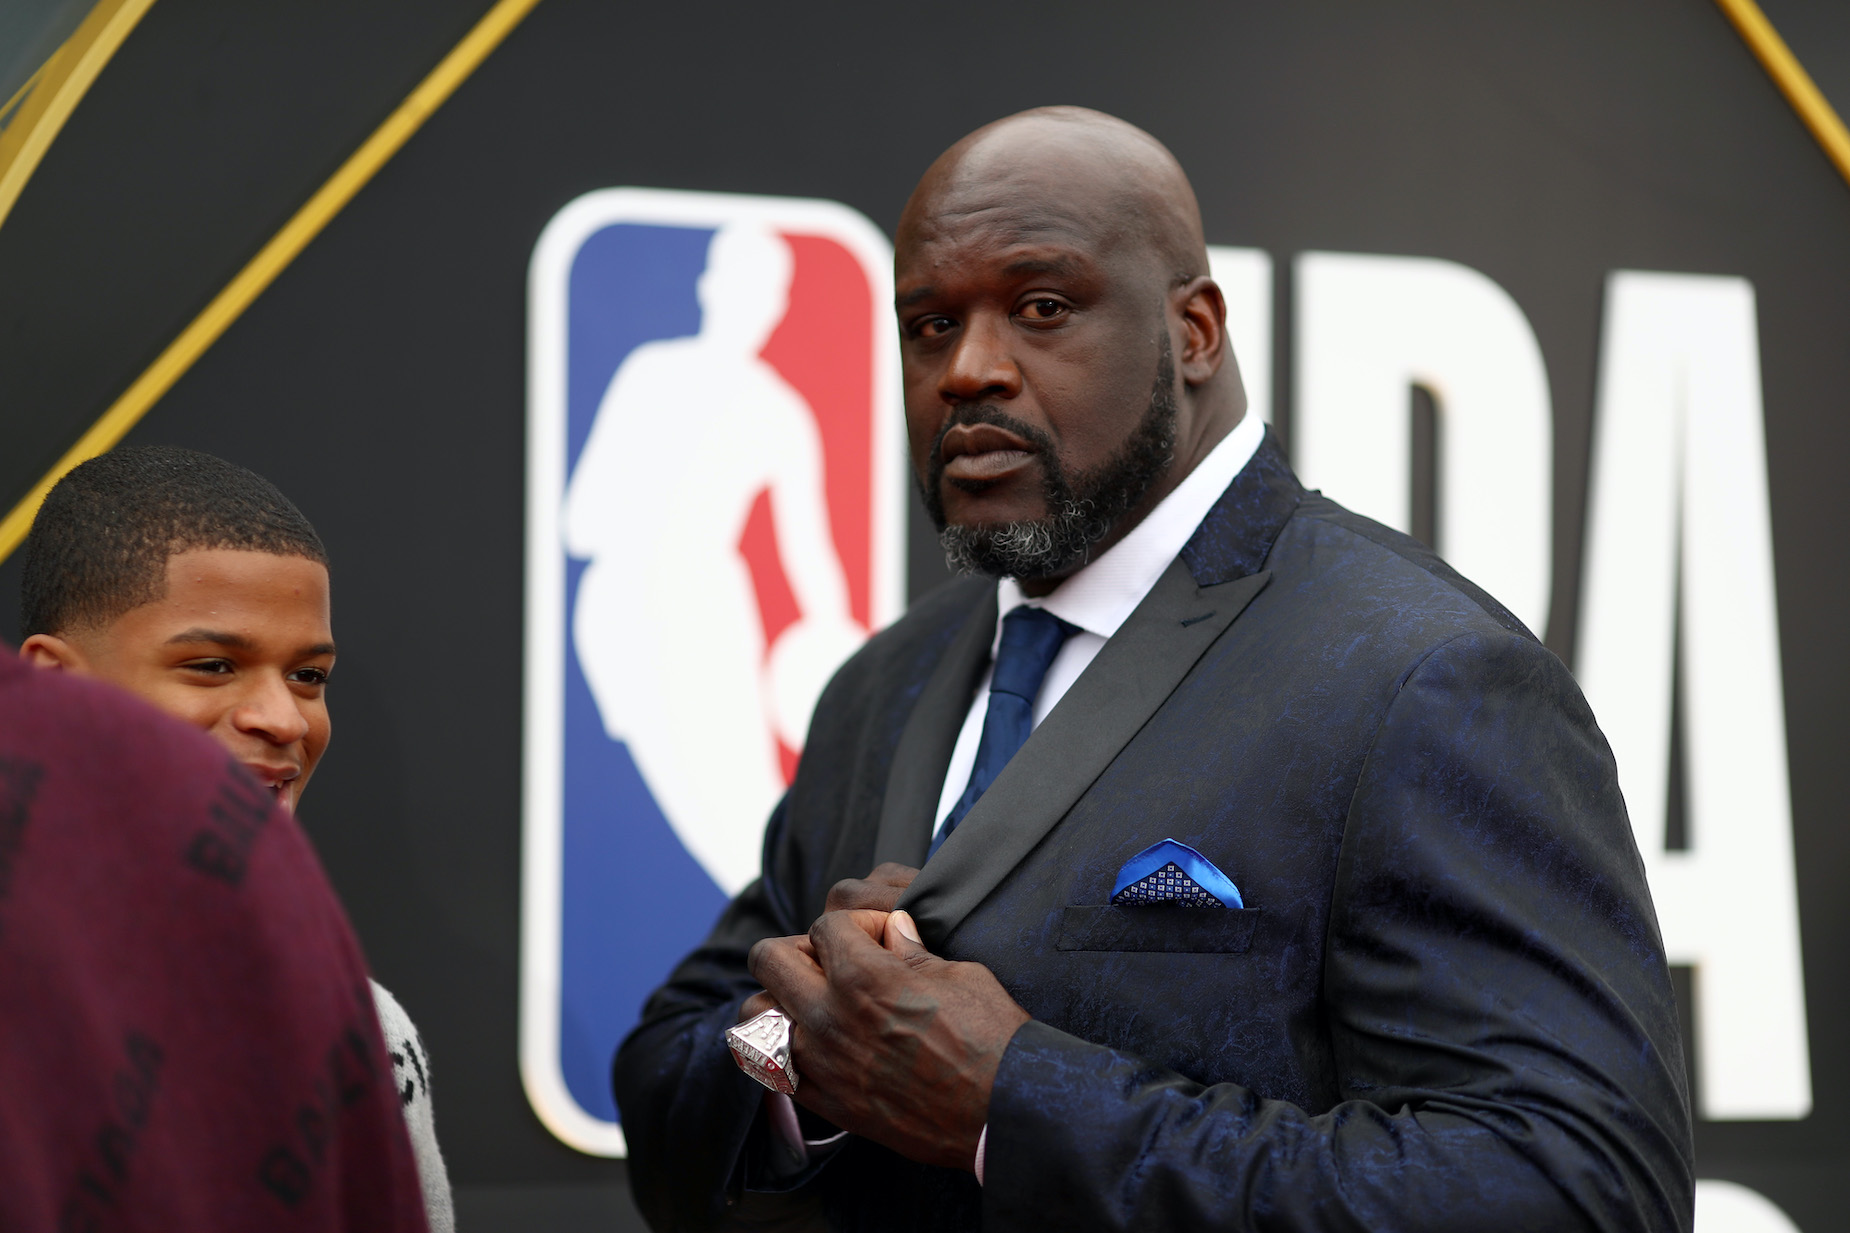 Shaquille O'Neal once faced a police investigation after some 'horseplay' with a TNT coworker.